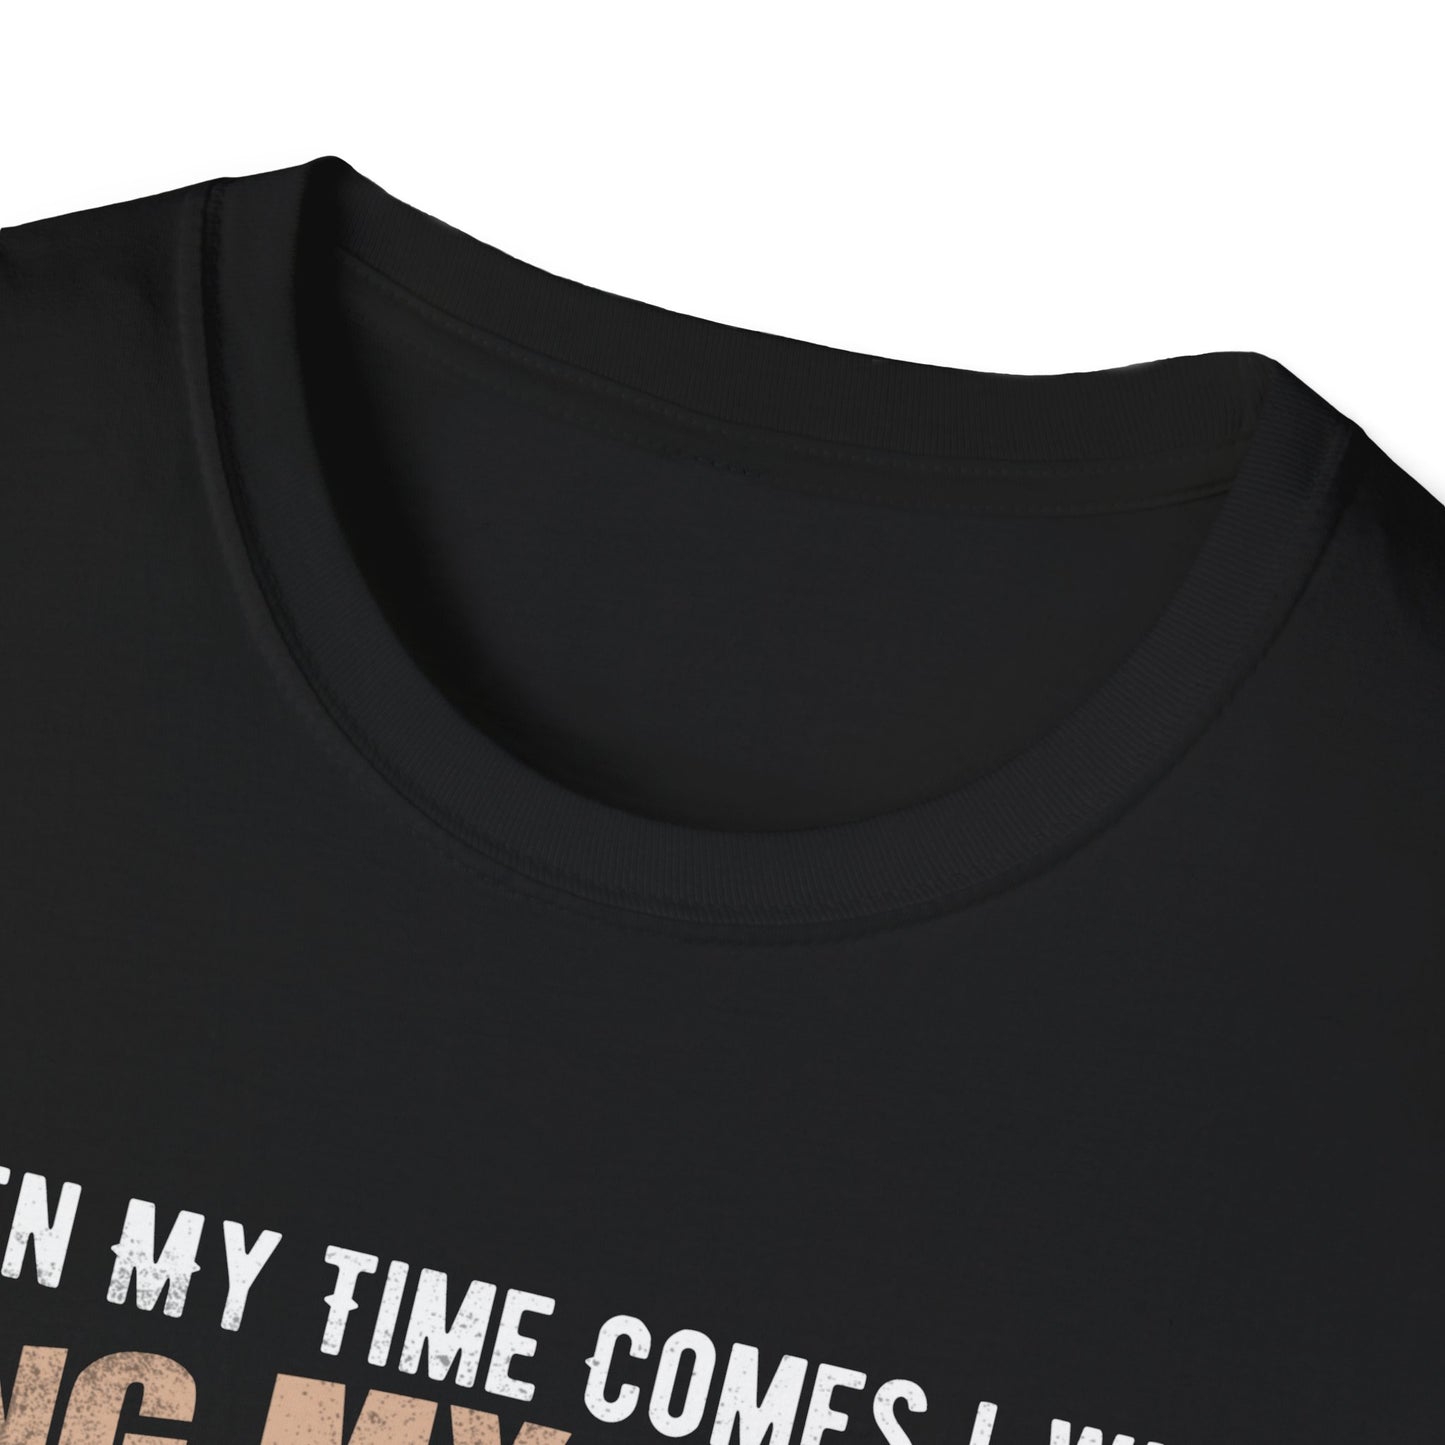 When My Time Comes I Will Sing My Death Song And Die Like A Warrior Going Home T-Shirt